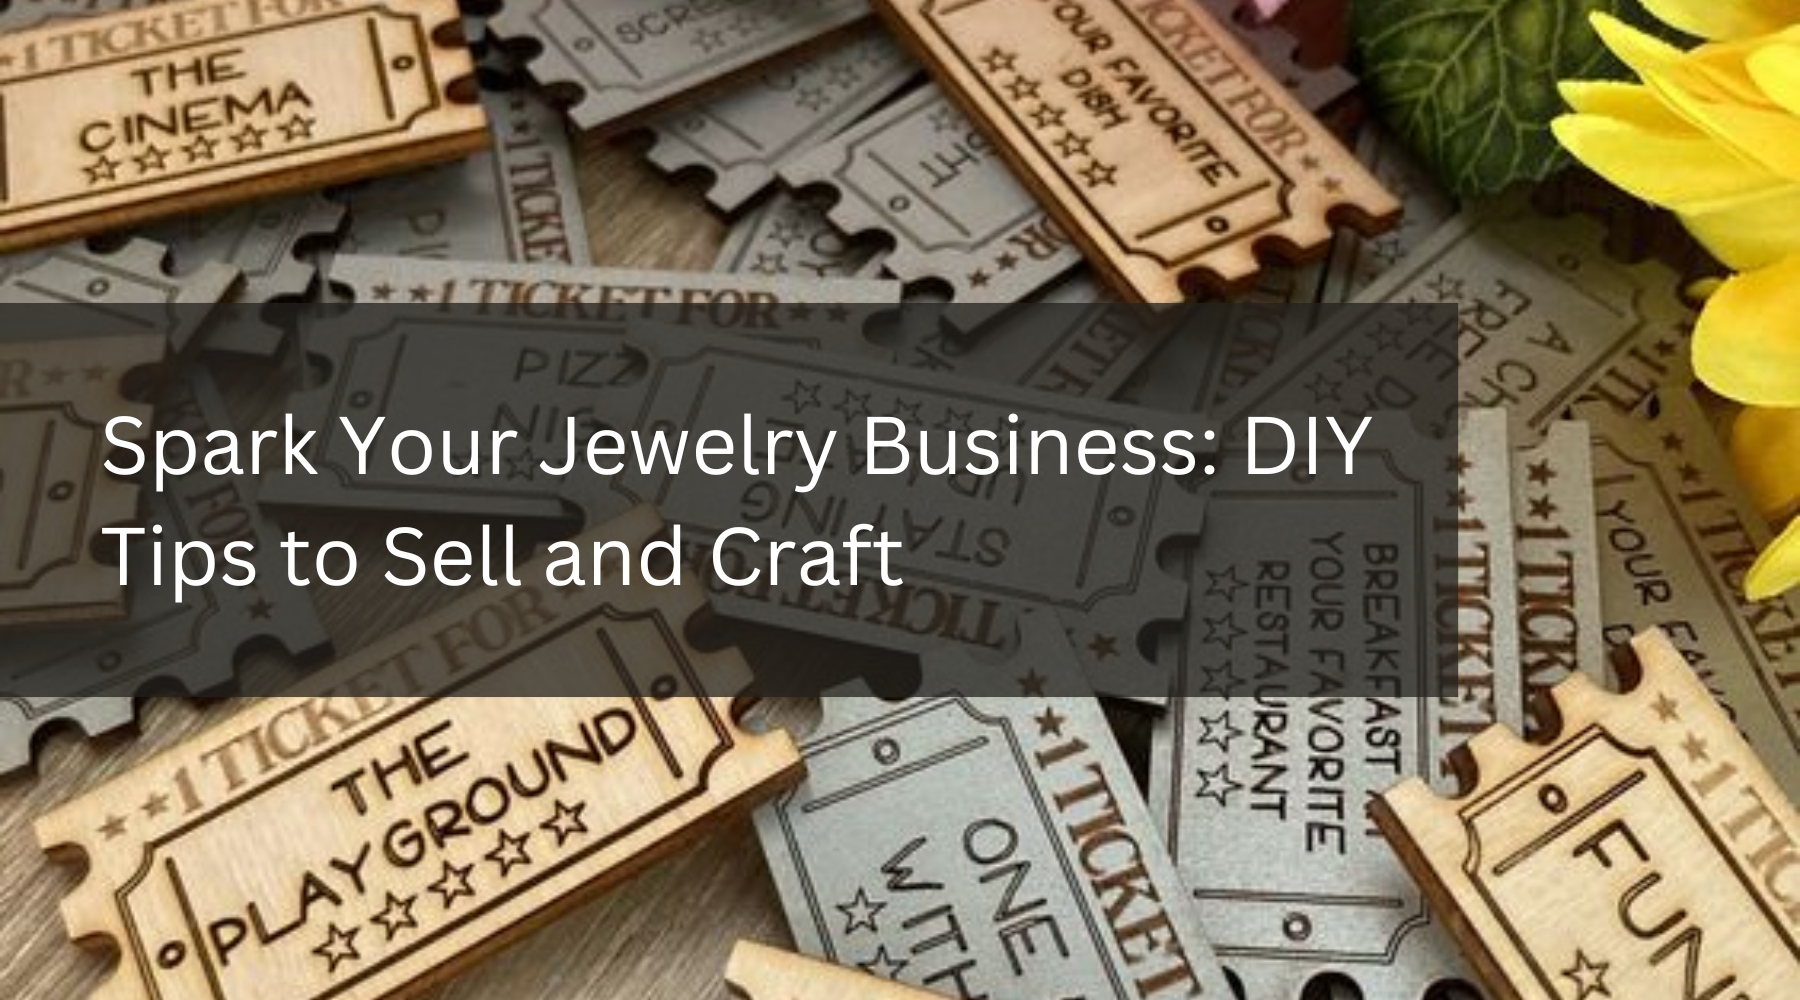 Spark Your Jewelry Business: DIY Tips to Sell and Craft